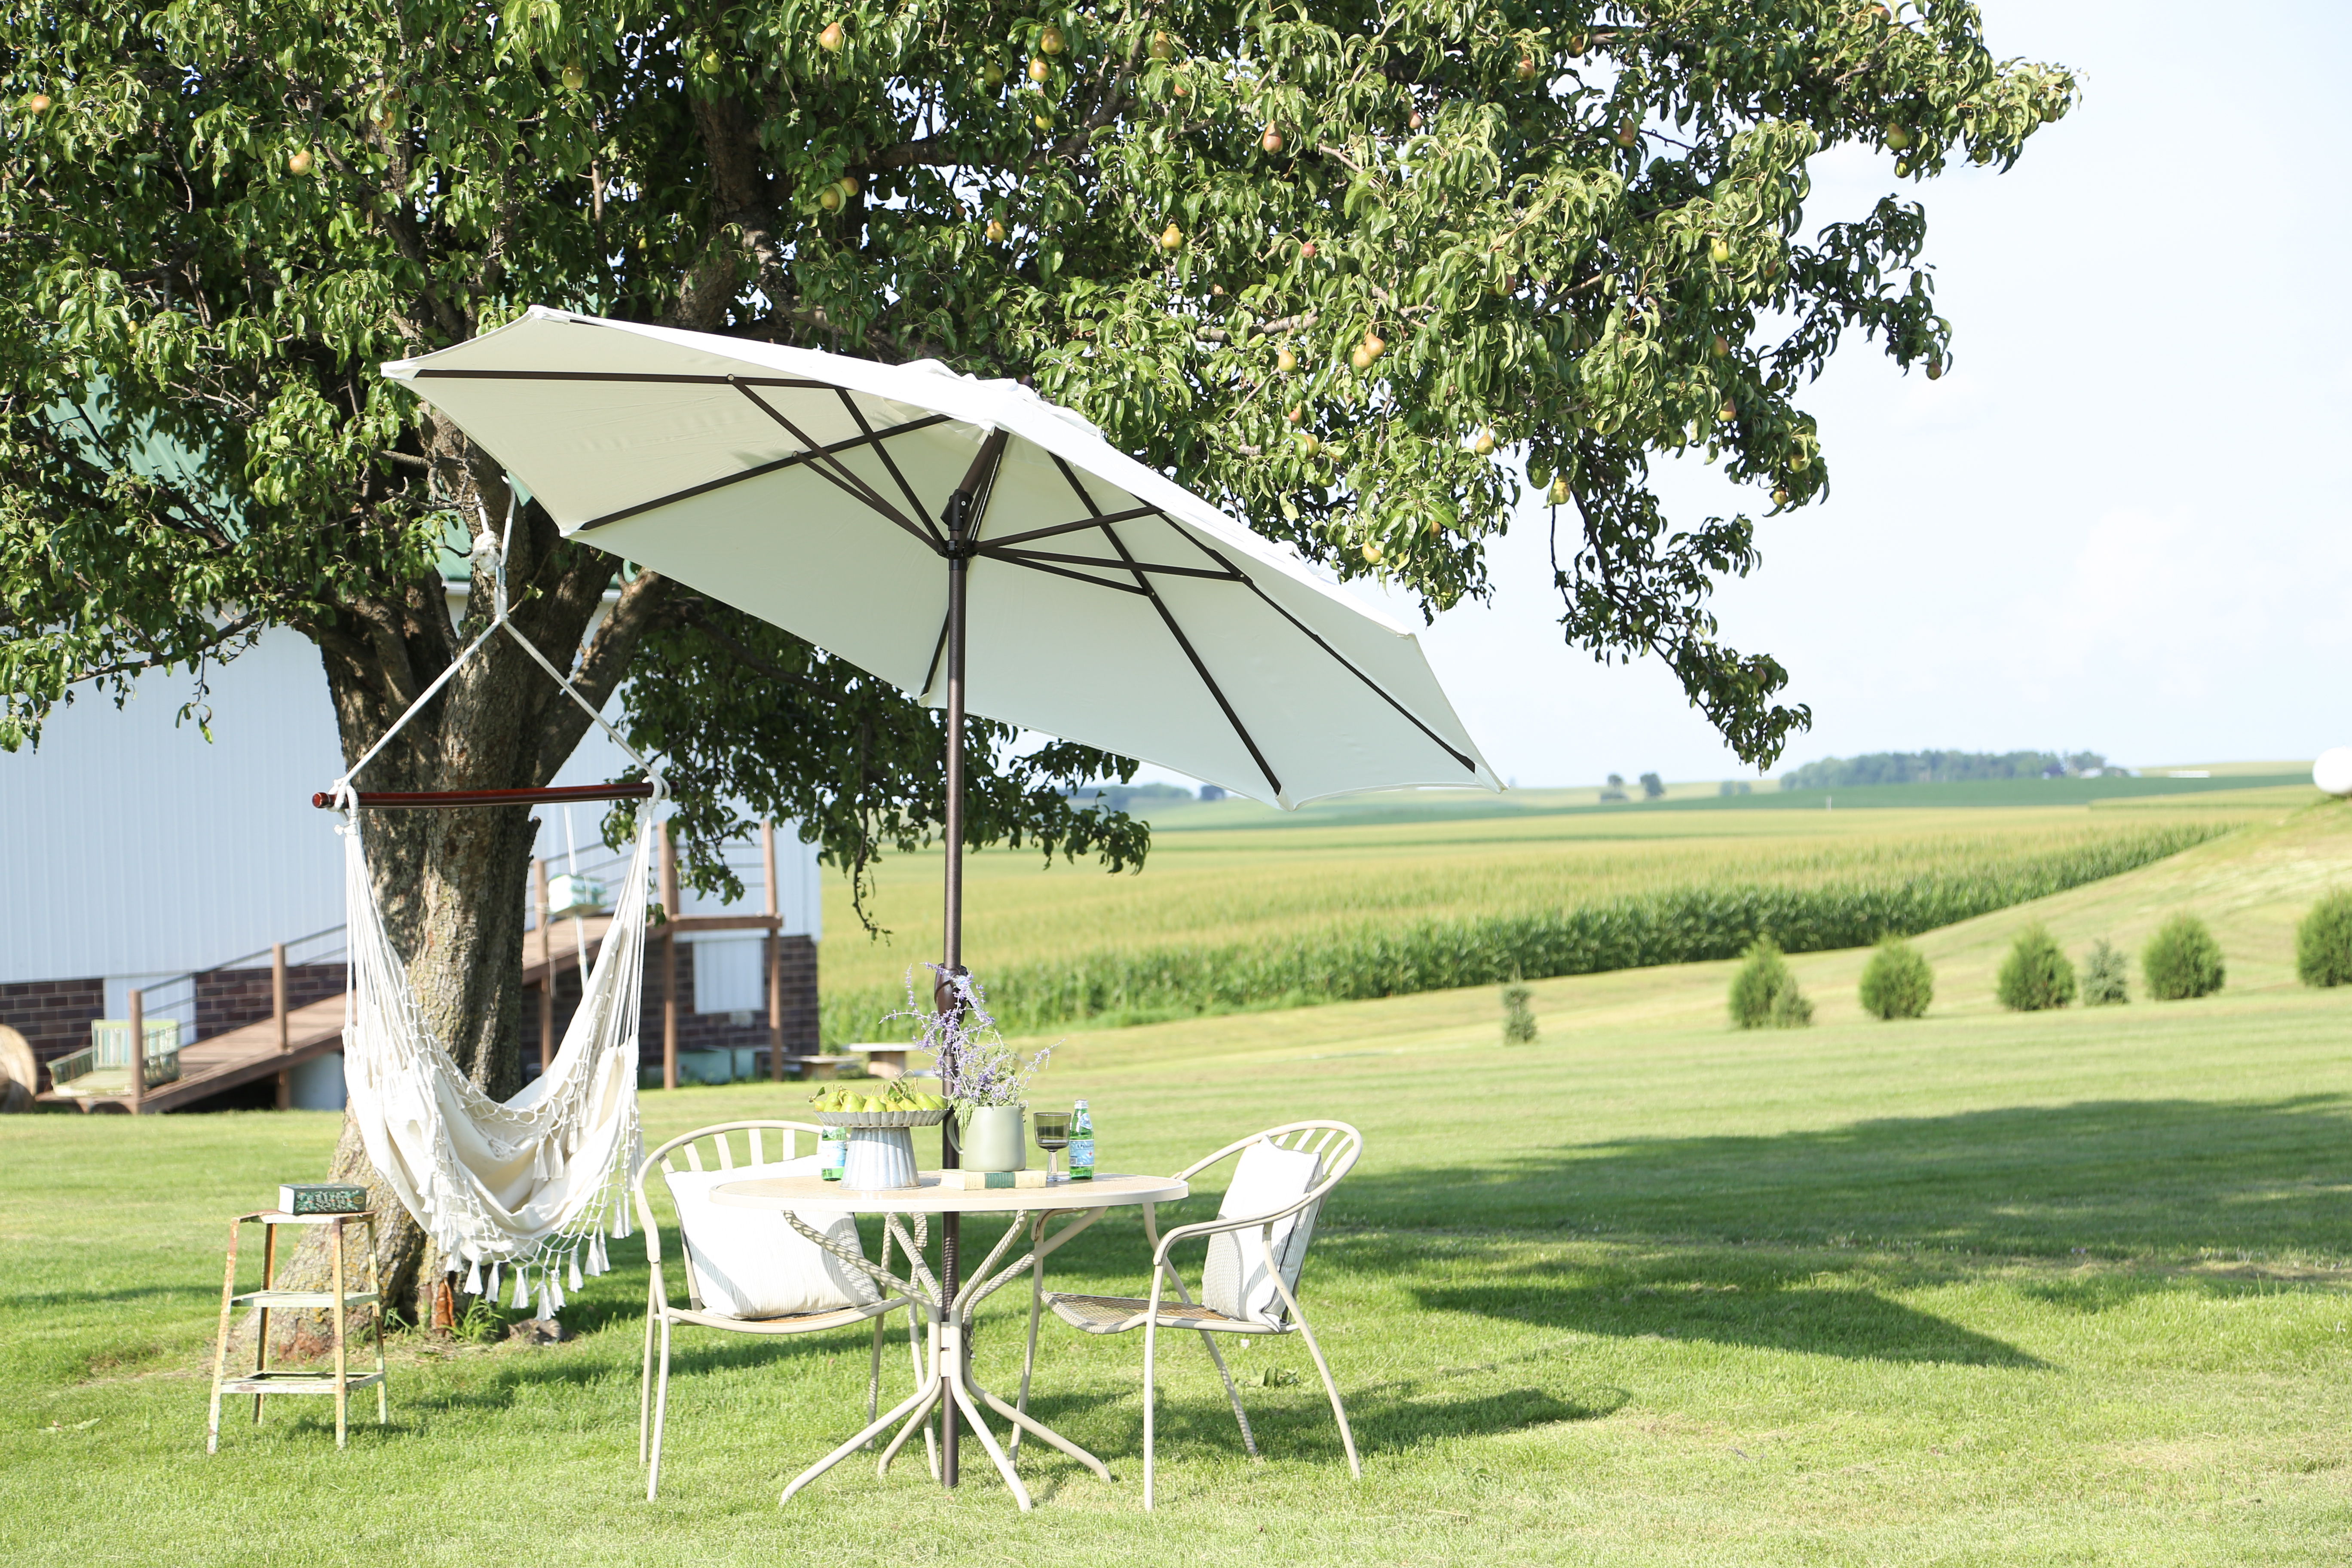 A small table and chairs with an umbrella is is perfect setup for the farm backyard.